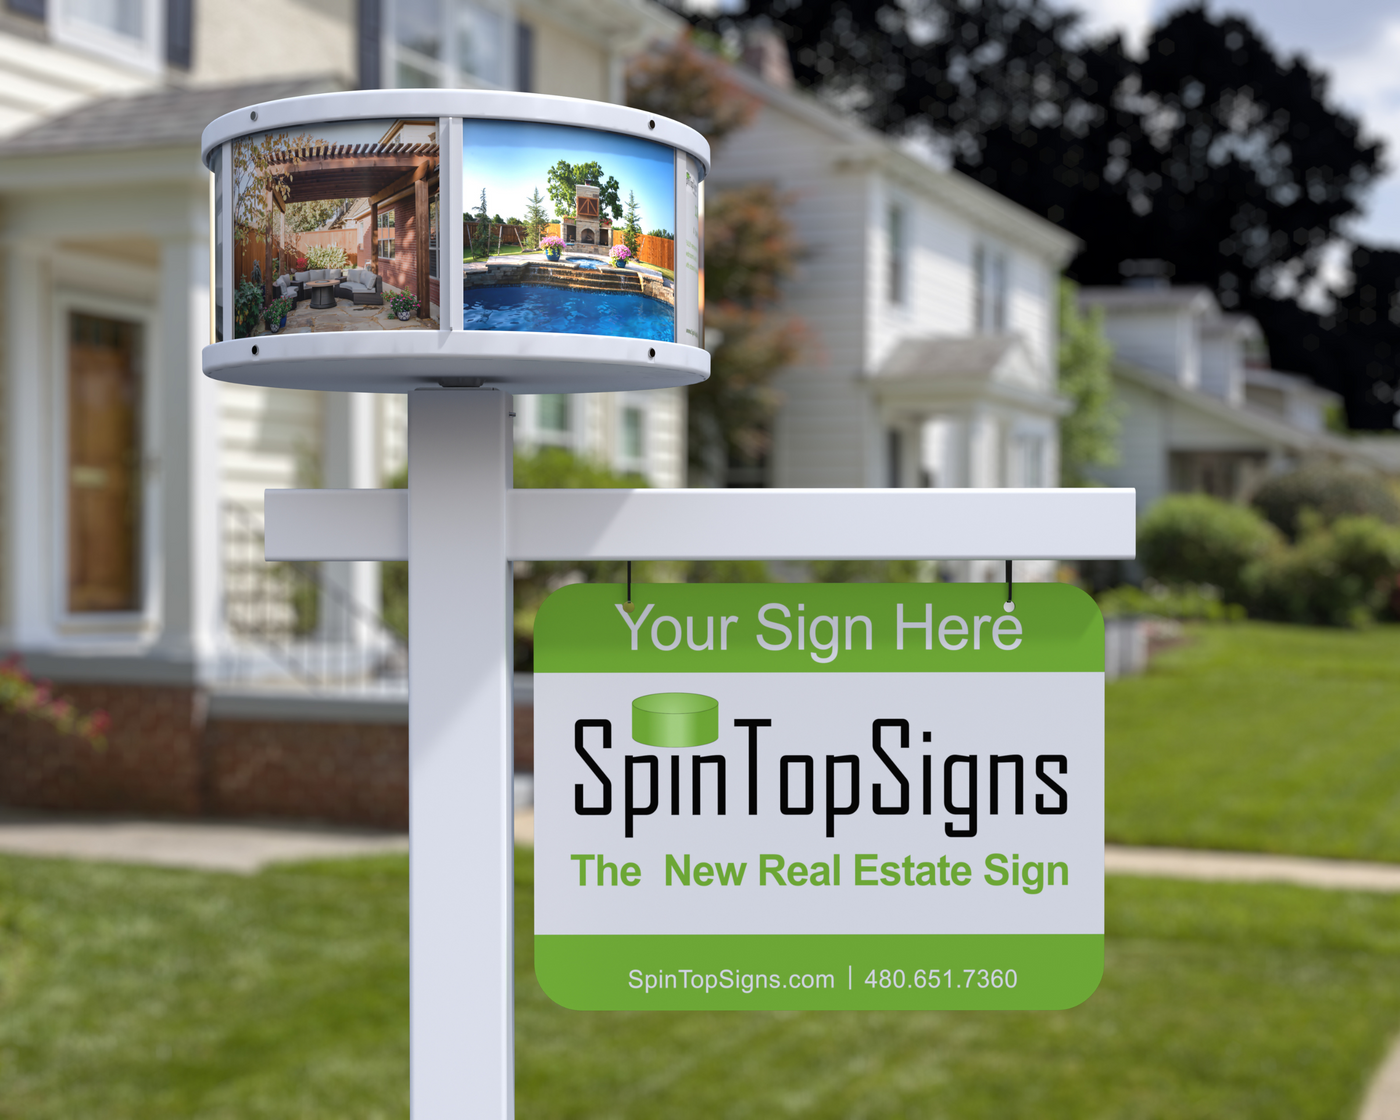 SpinTopSign